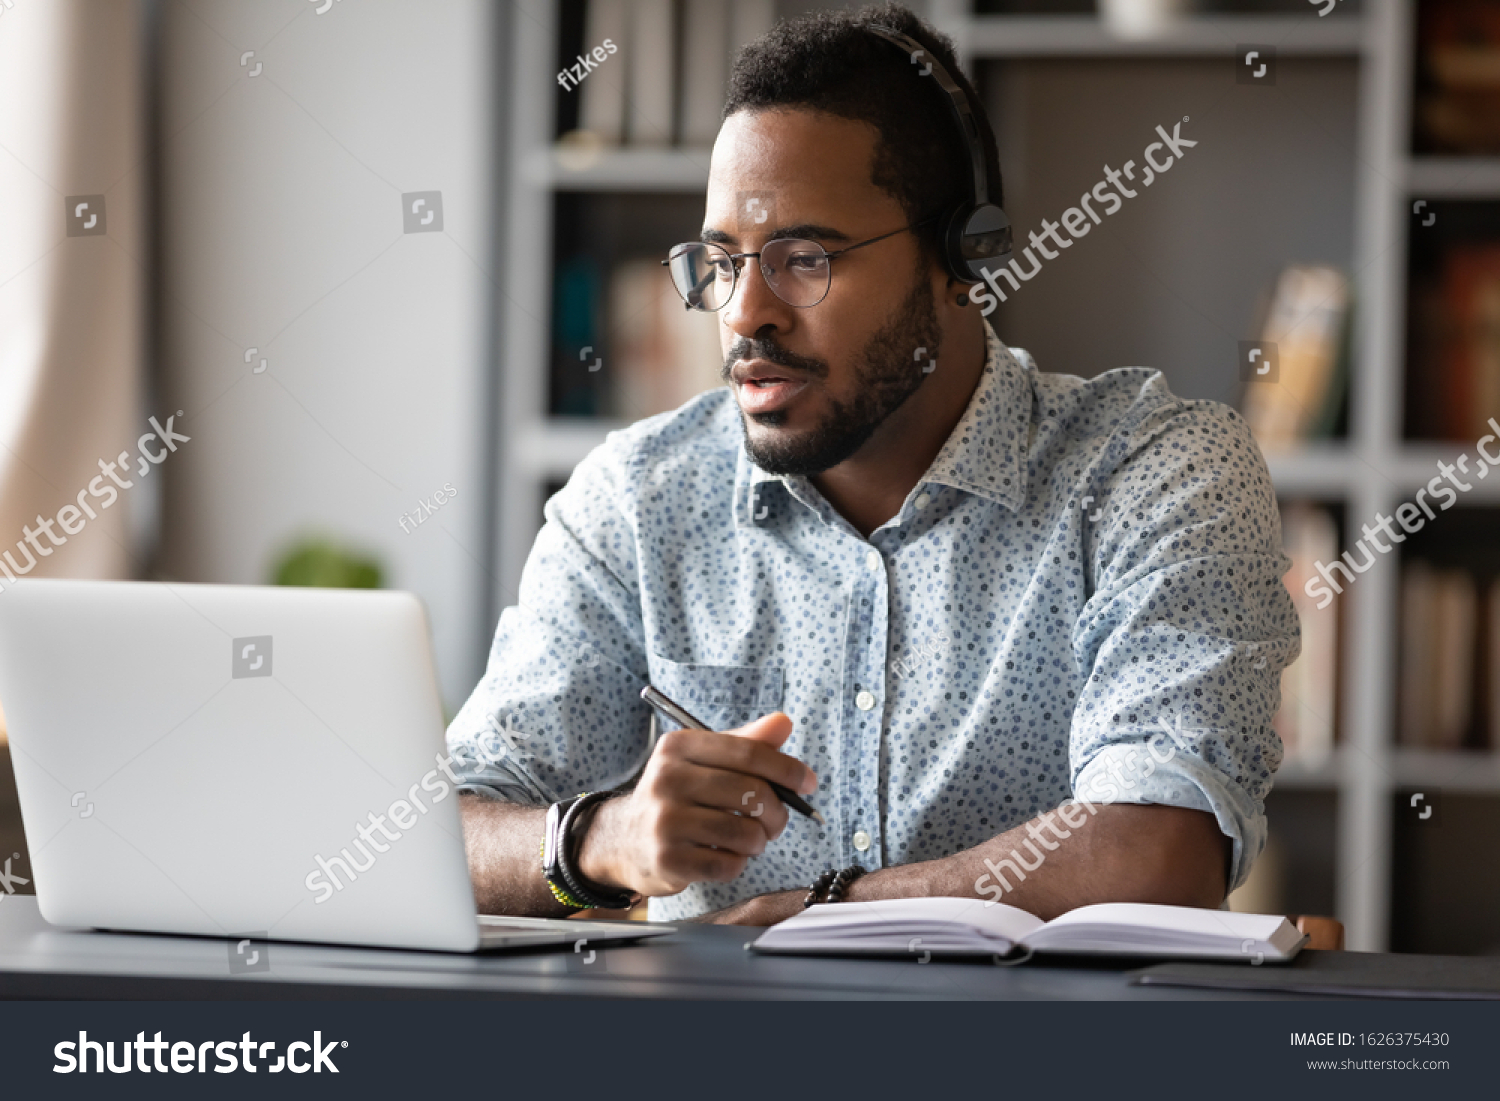 Focused young african businessman wear headphones study online watching webinar podcast on laptop listening learning education course conference calling make notes sit at work desk, elearning concept #1626375430